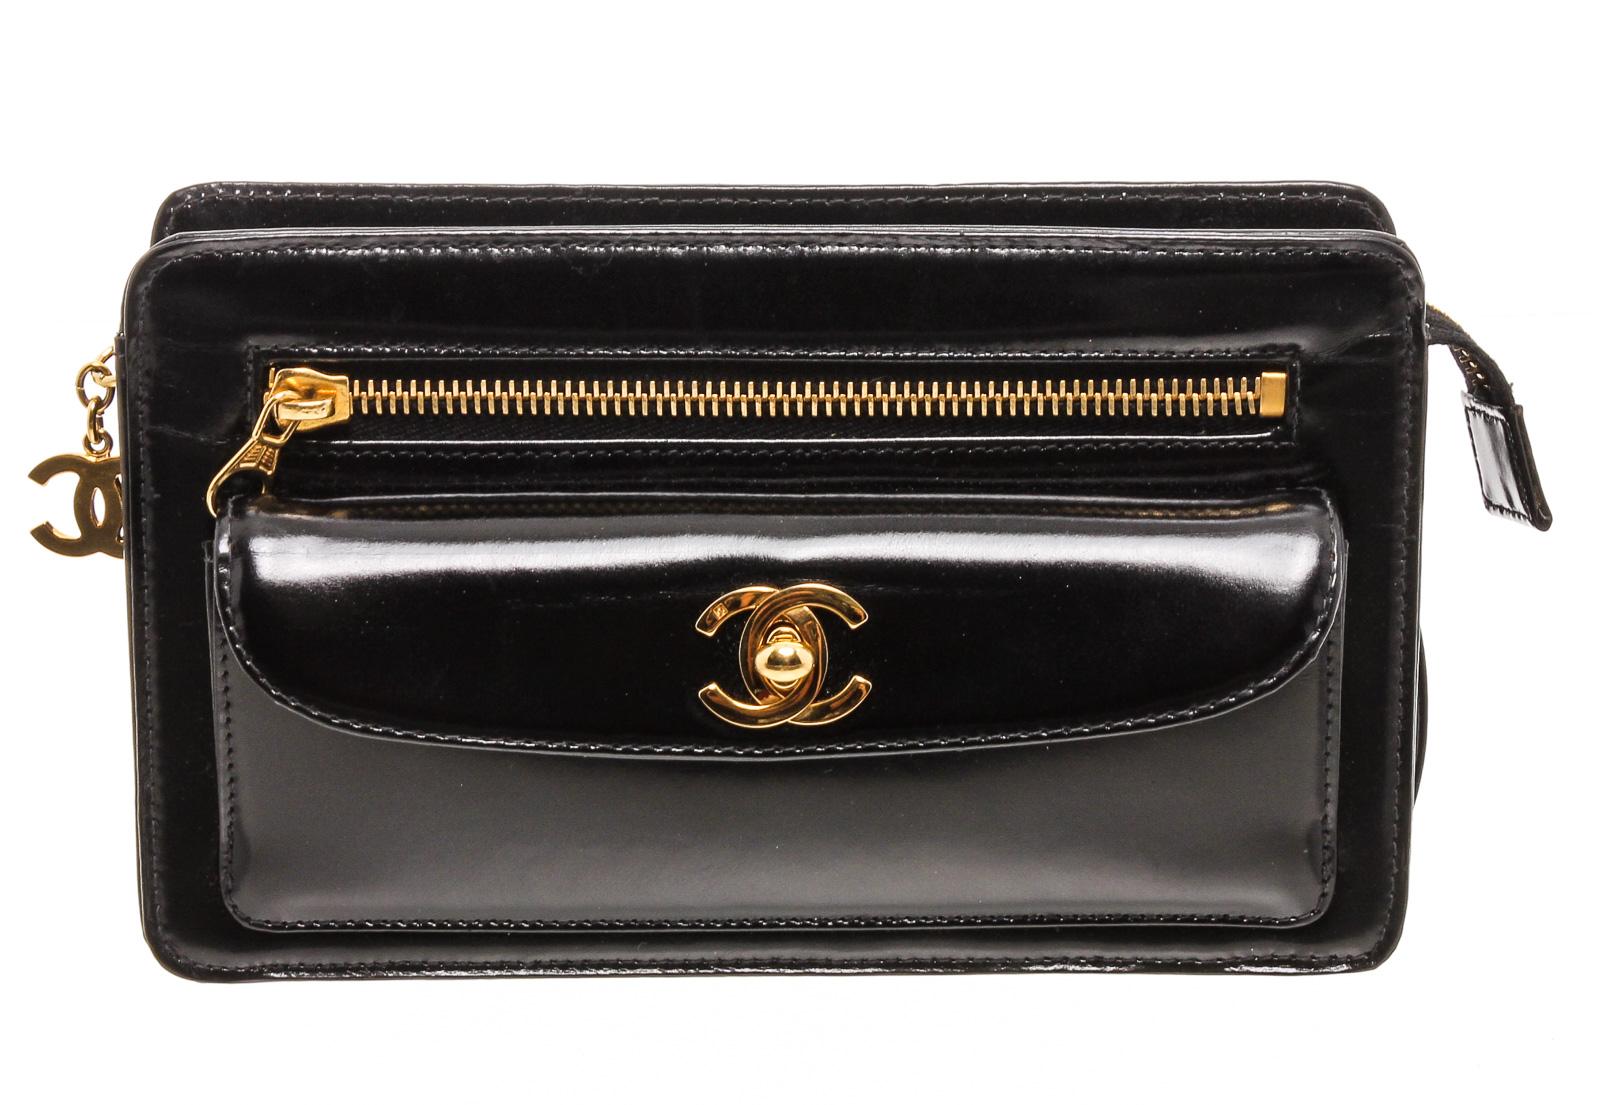 Black patent leather Chanel vintage wristlet clutch with gold-tone hardware, three exterior pockets; one with CC turn-lock closure, burgundy leather lining, one slip pocket at interior wall and overall zip closure with CC zip adornment. 

16270MSC